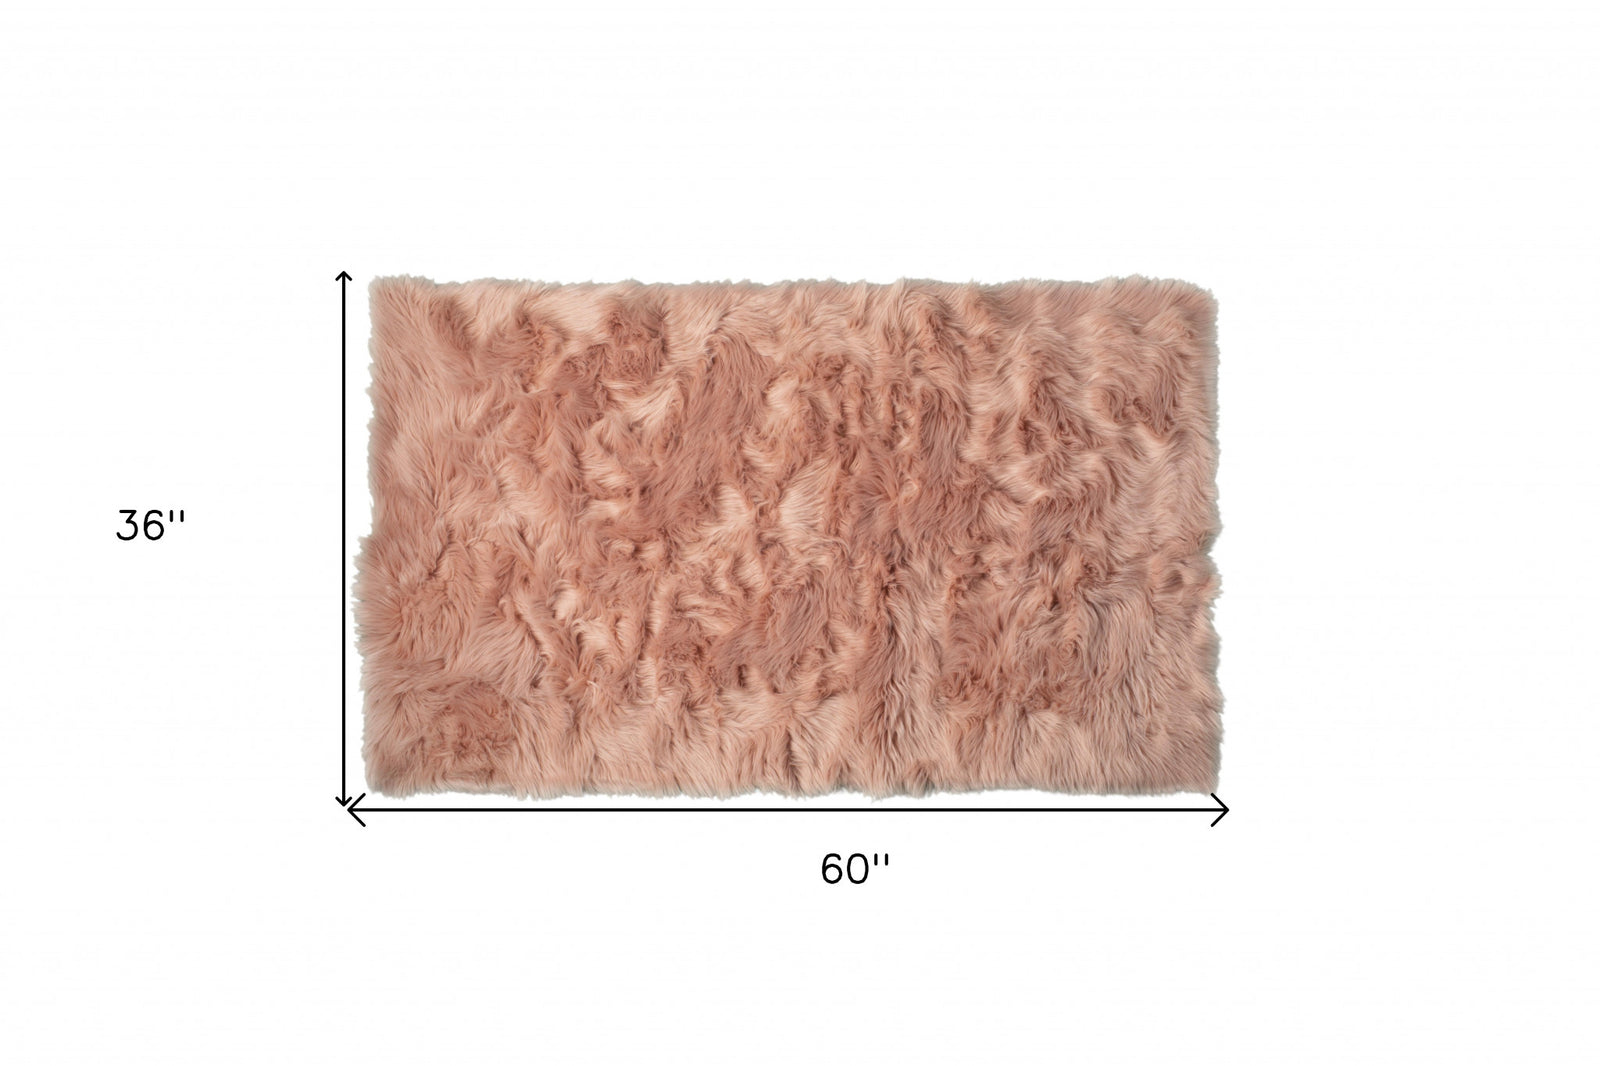 3' X 5' Dusty Rose Faux Fur Non Skid Area Rug